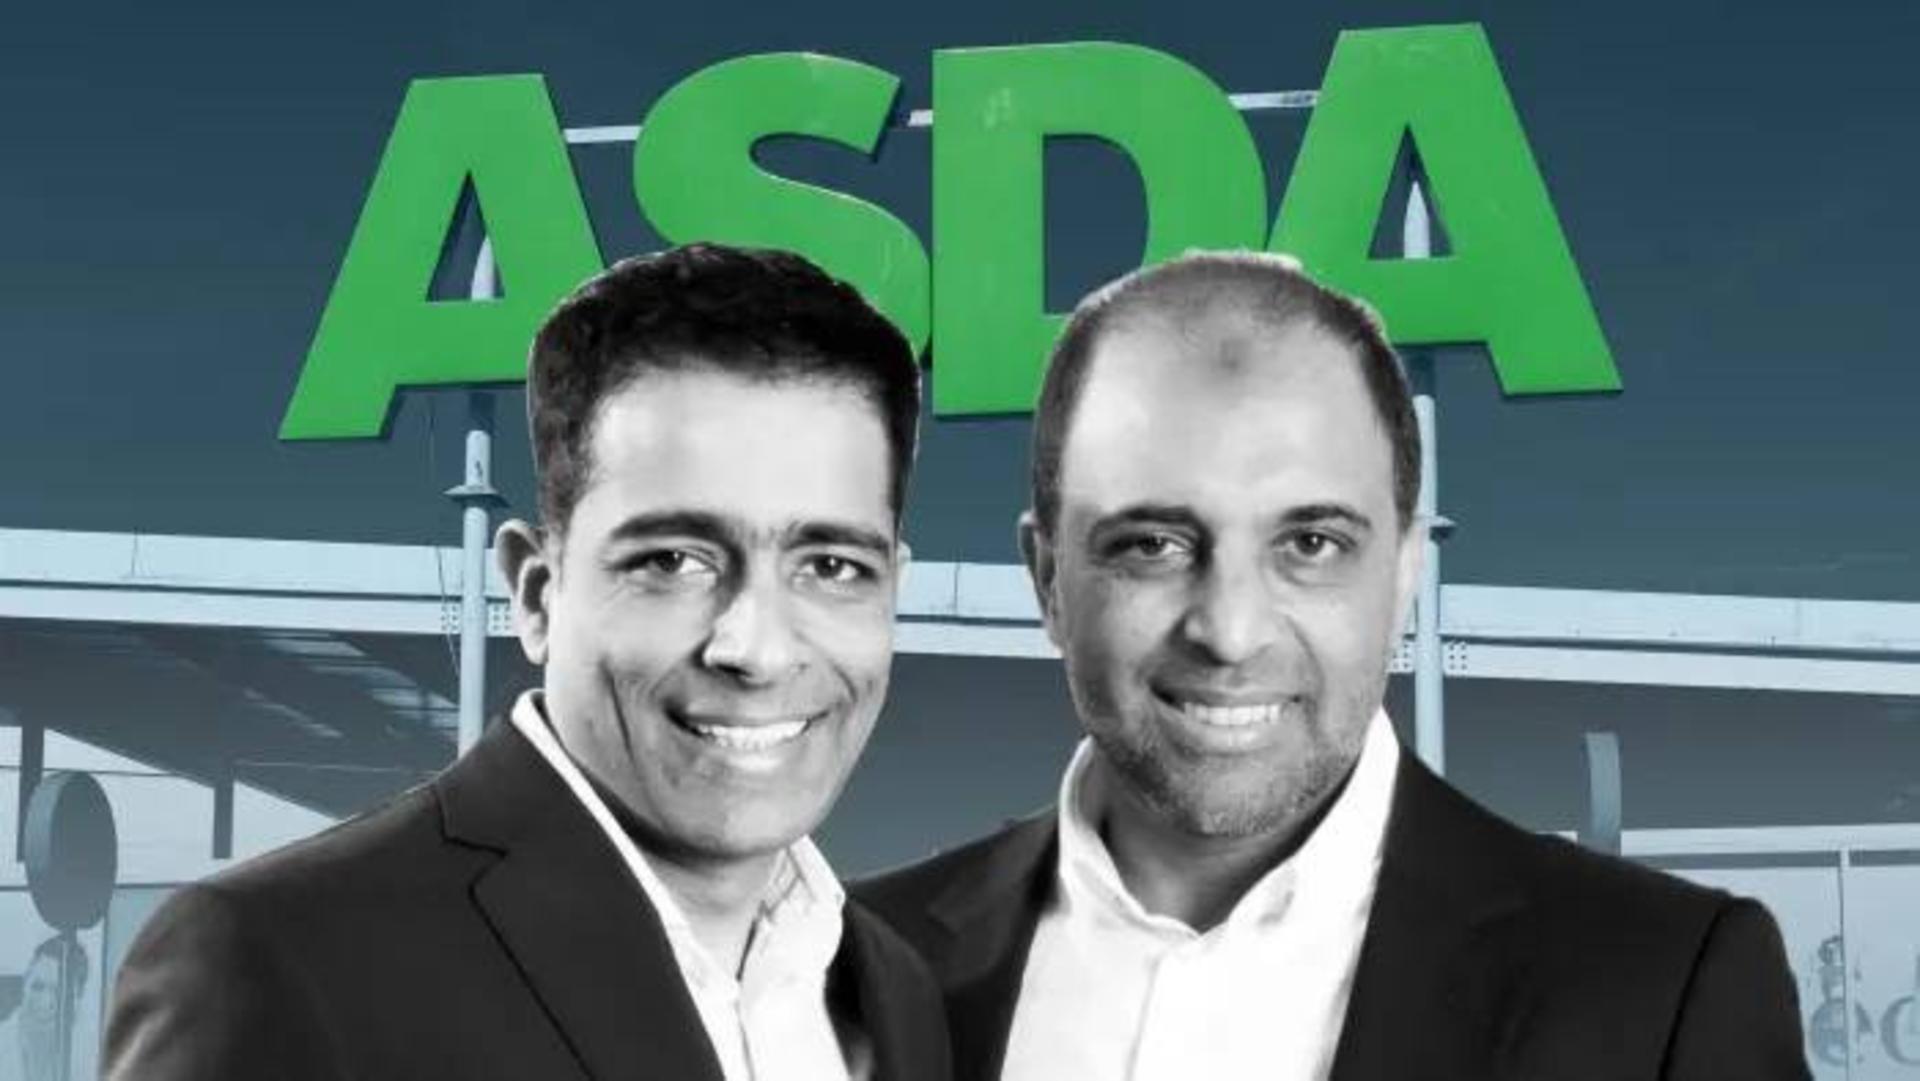 Issa brothers, TDR Capital to acquire Asda in highly-leveraged takeover